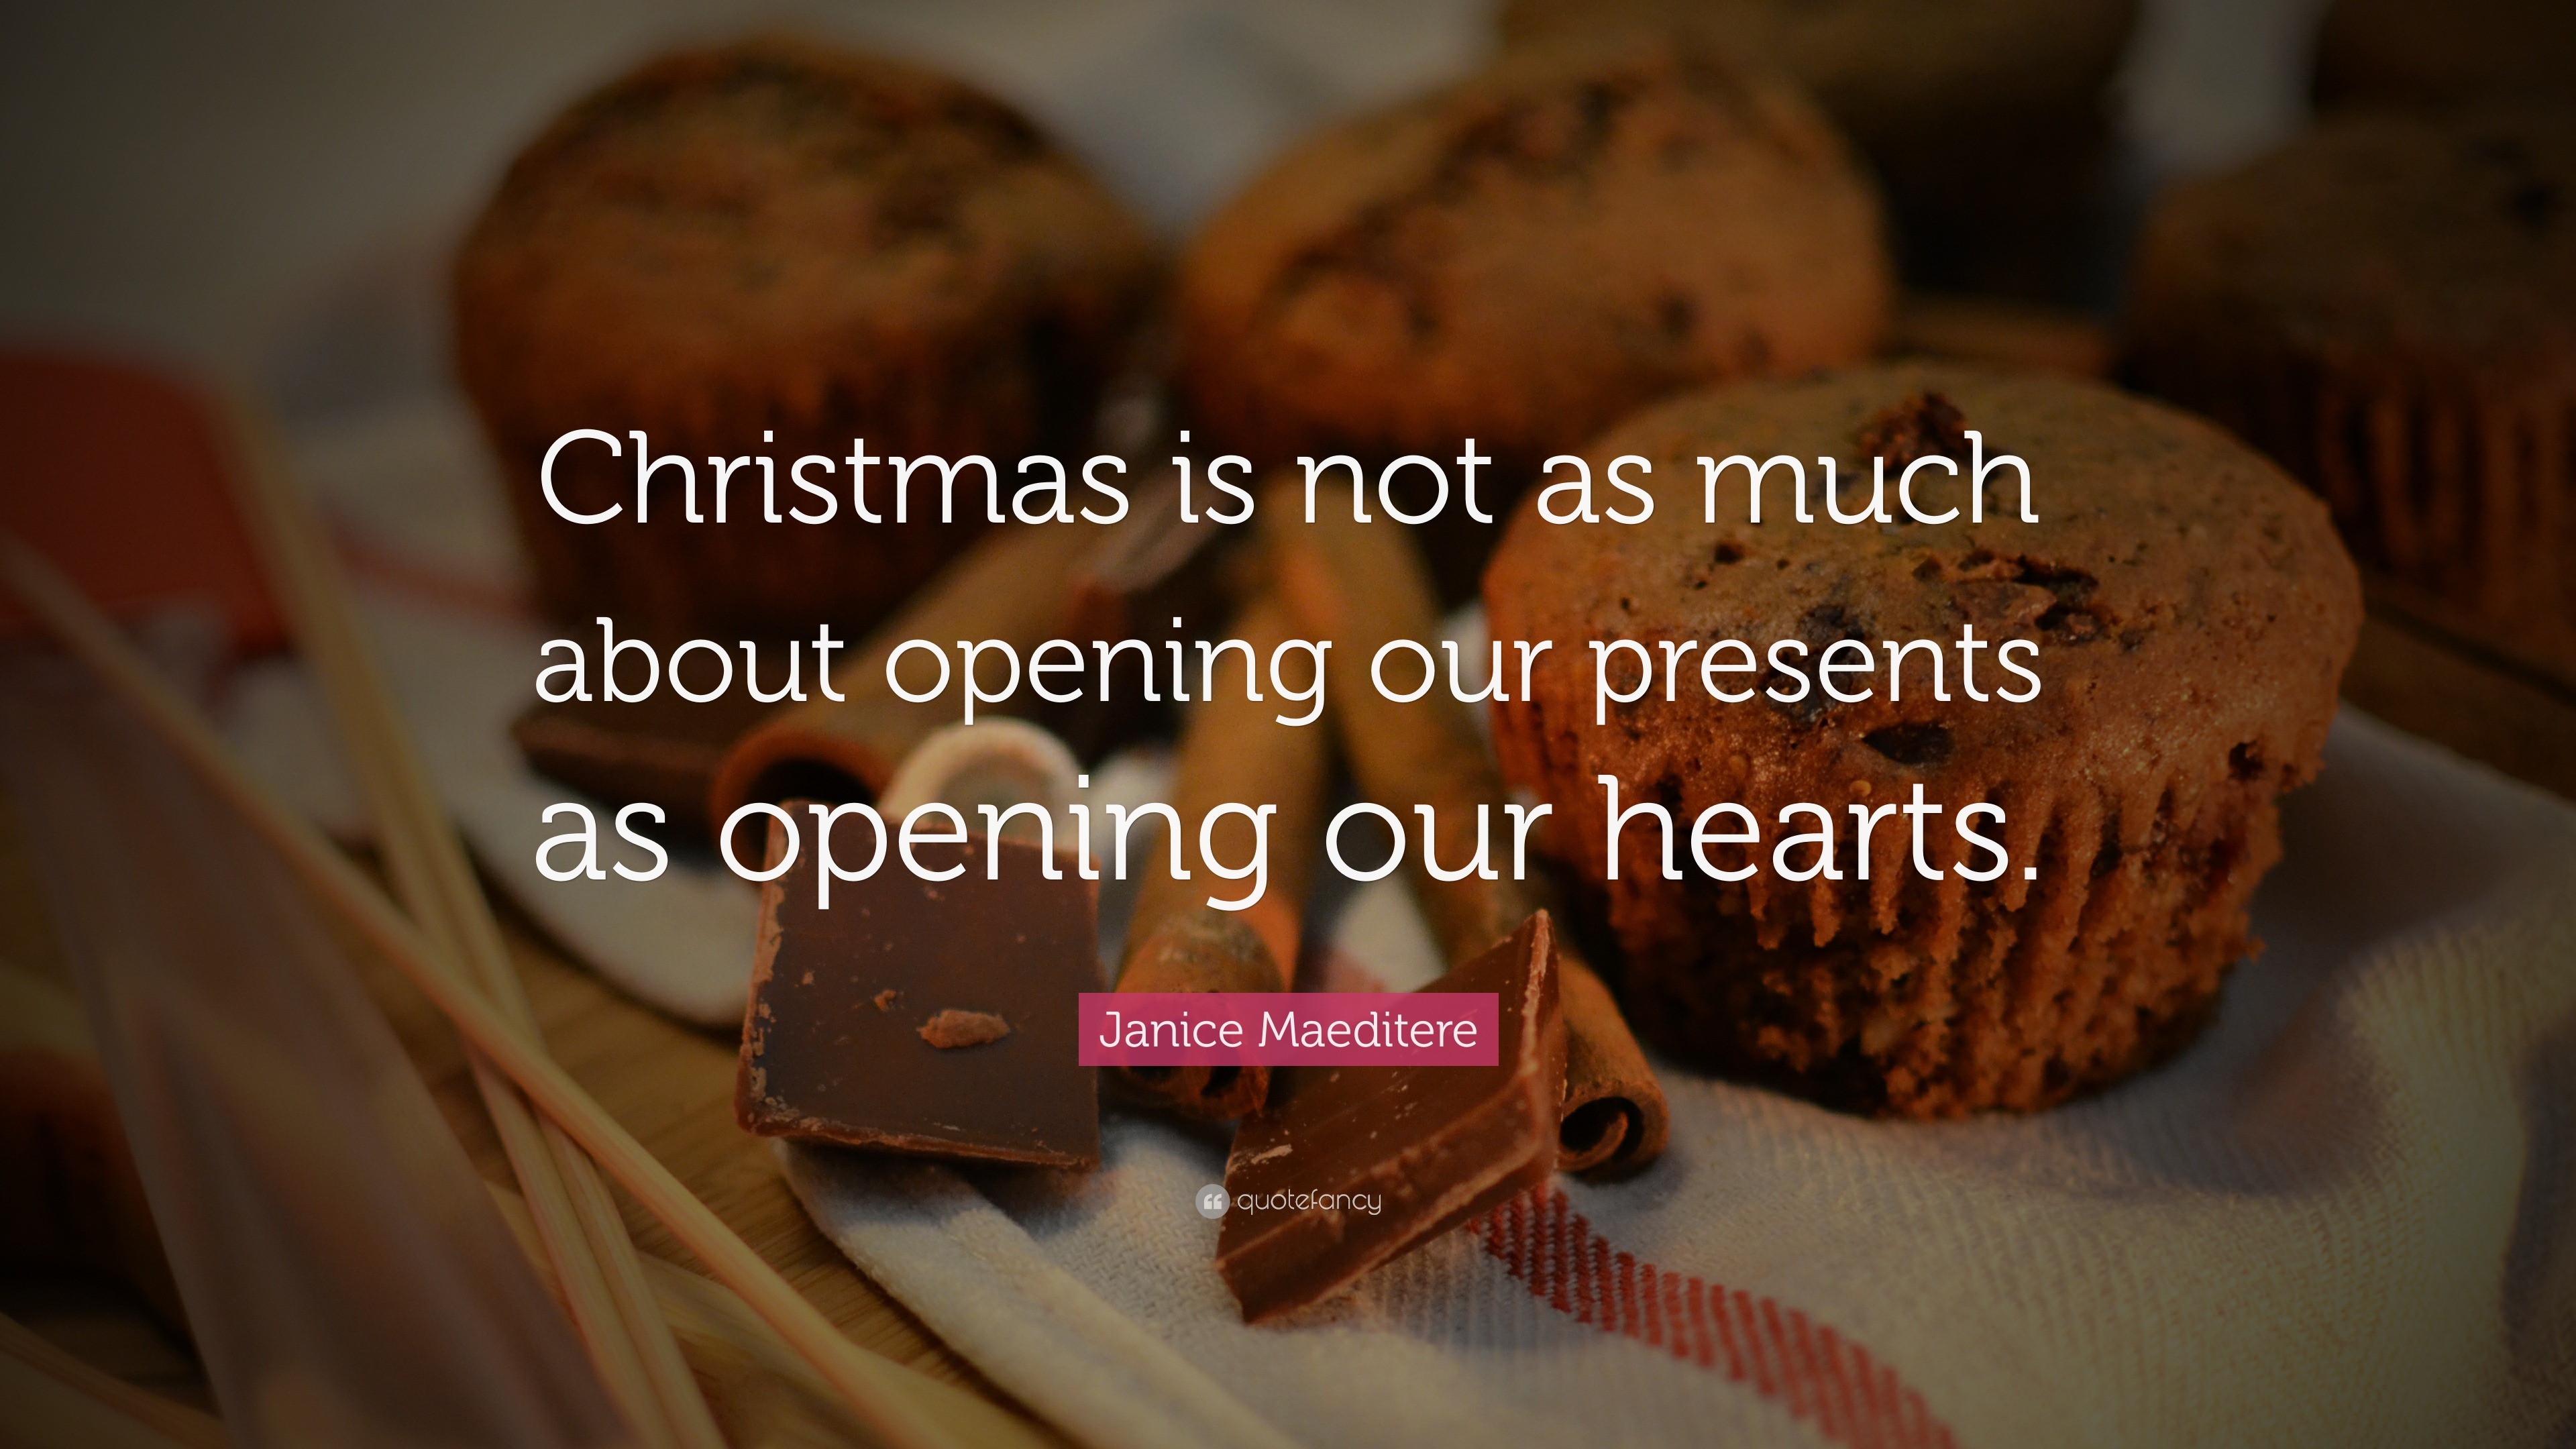 Janice Maeditere Quote “Christmas is not as much about opening our presents as opening